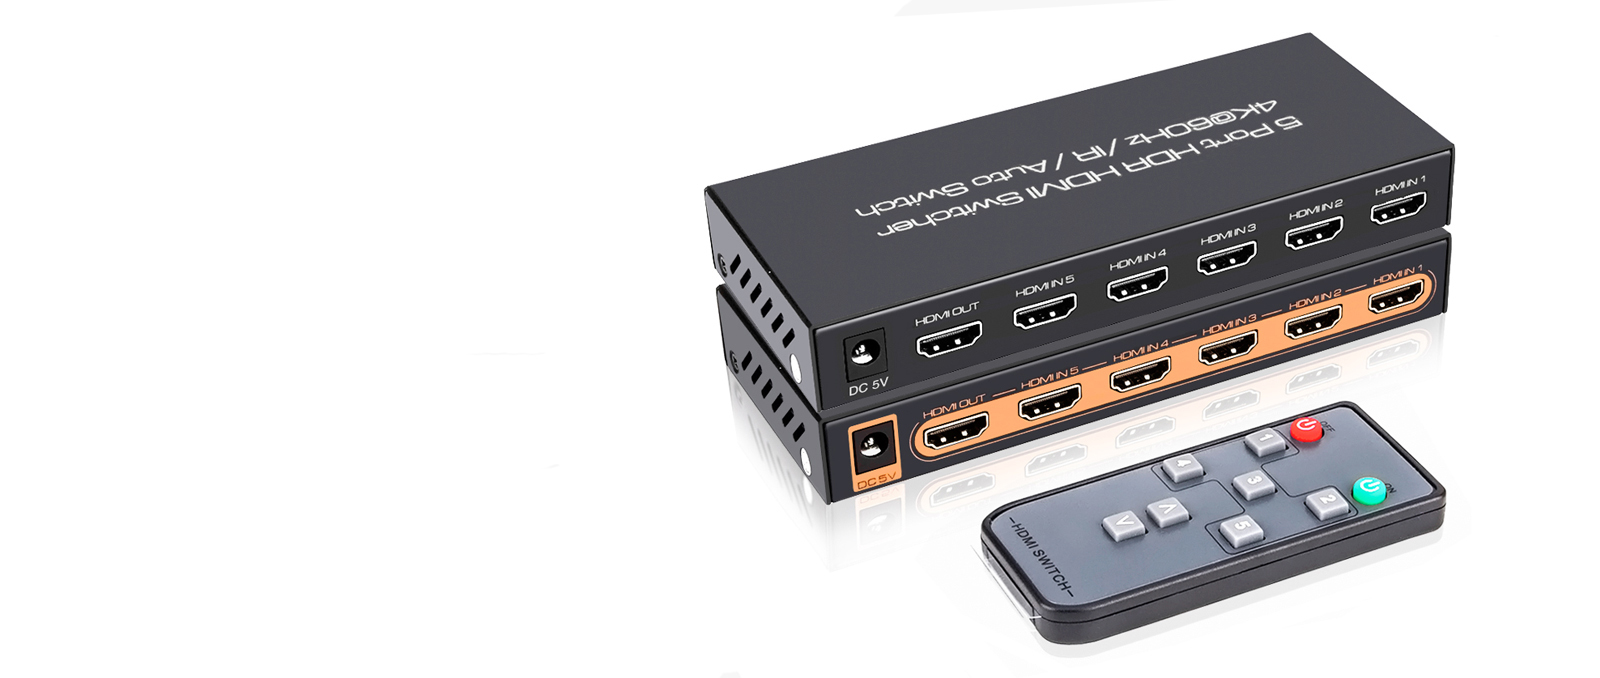 ROOFULL-HDMI-2.0-HDR-SWITCH-SWITCHER-4K-60HZ-HDCP-2.2